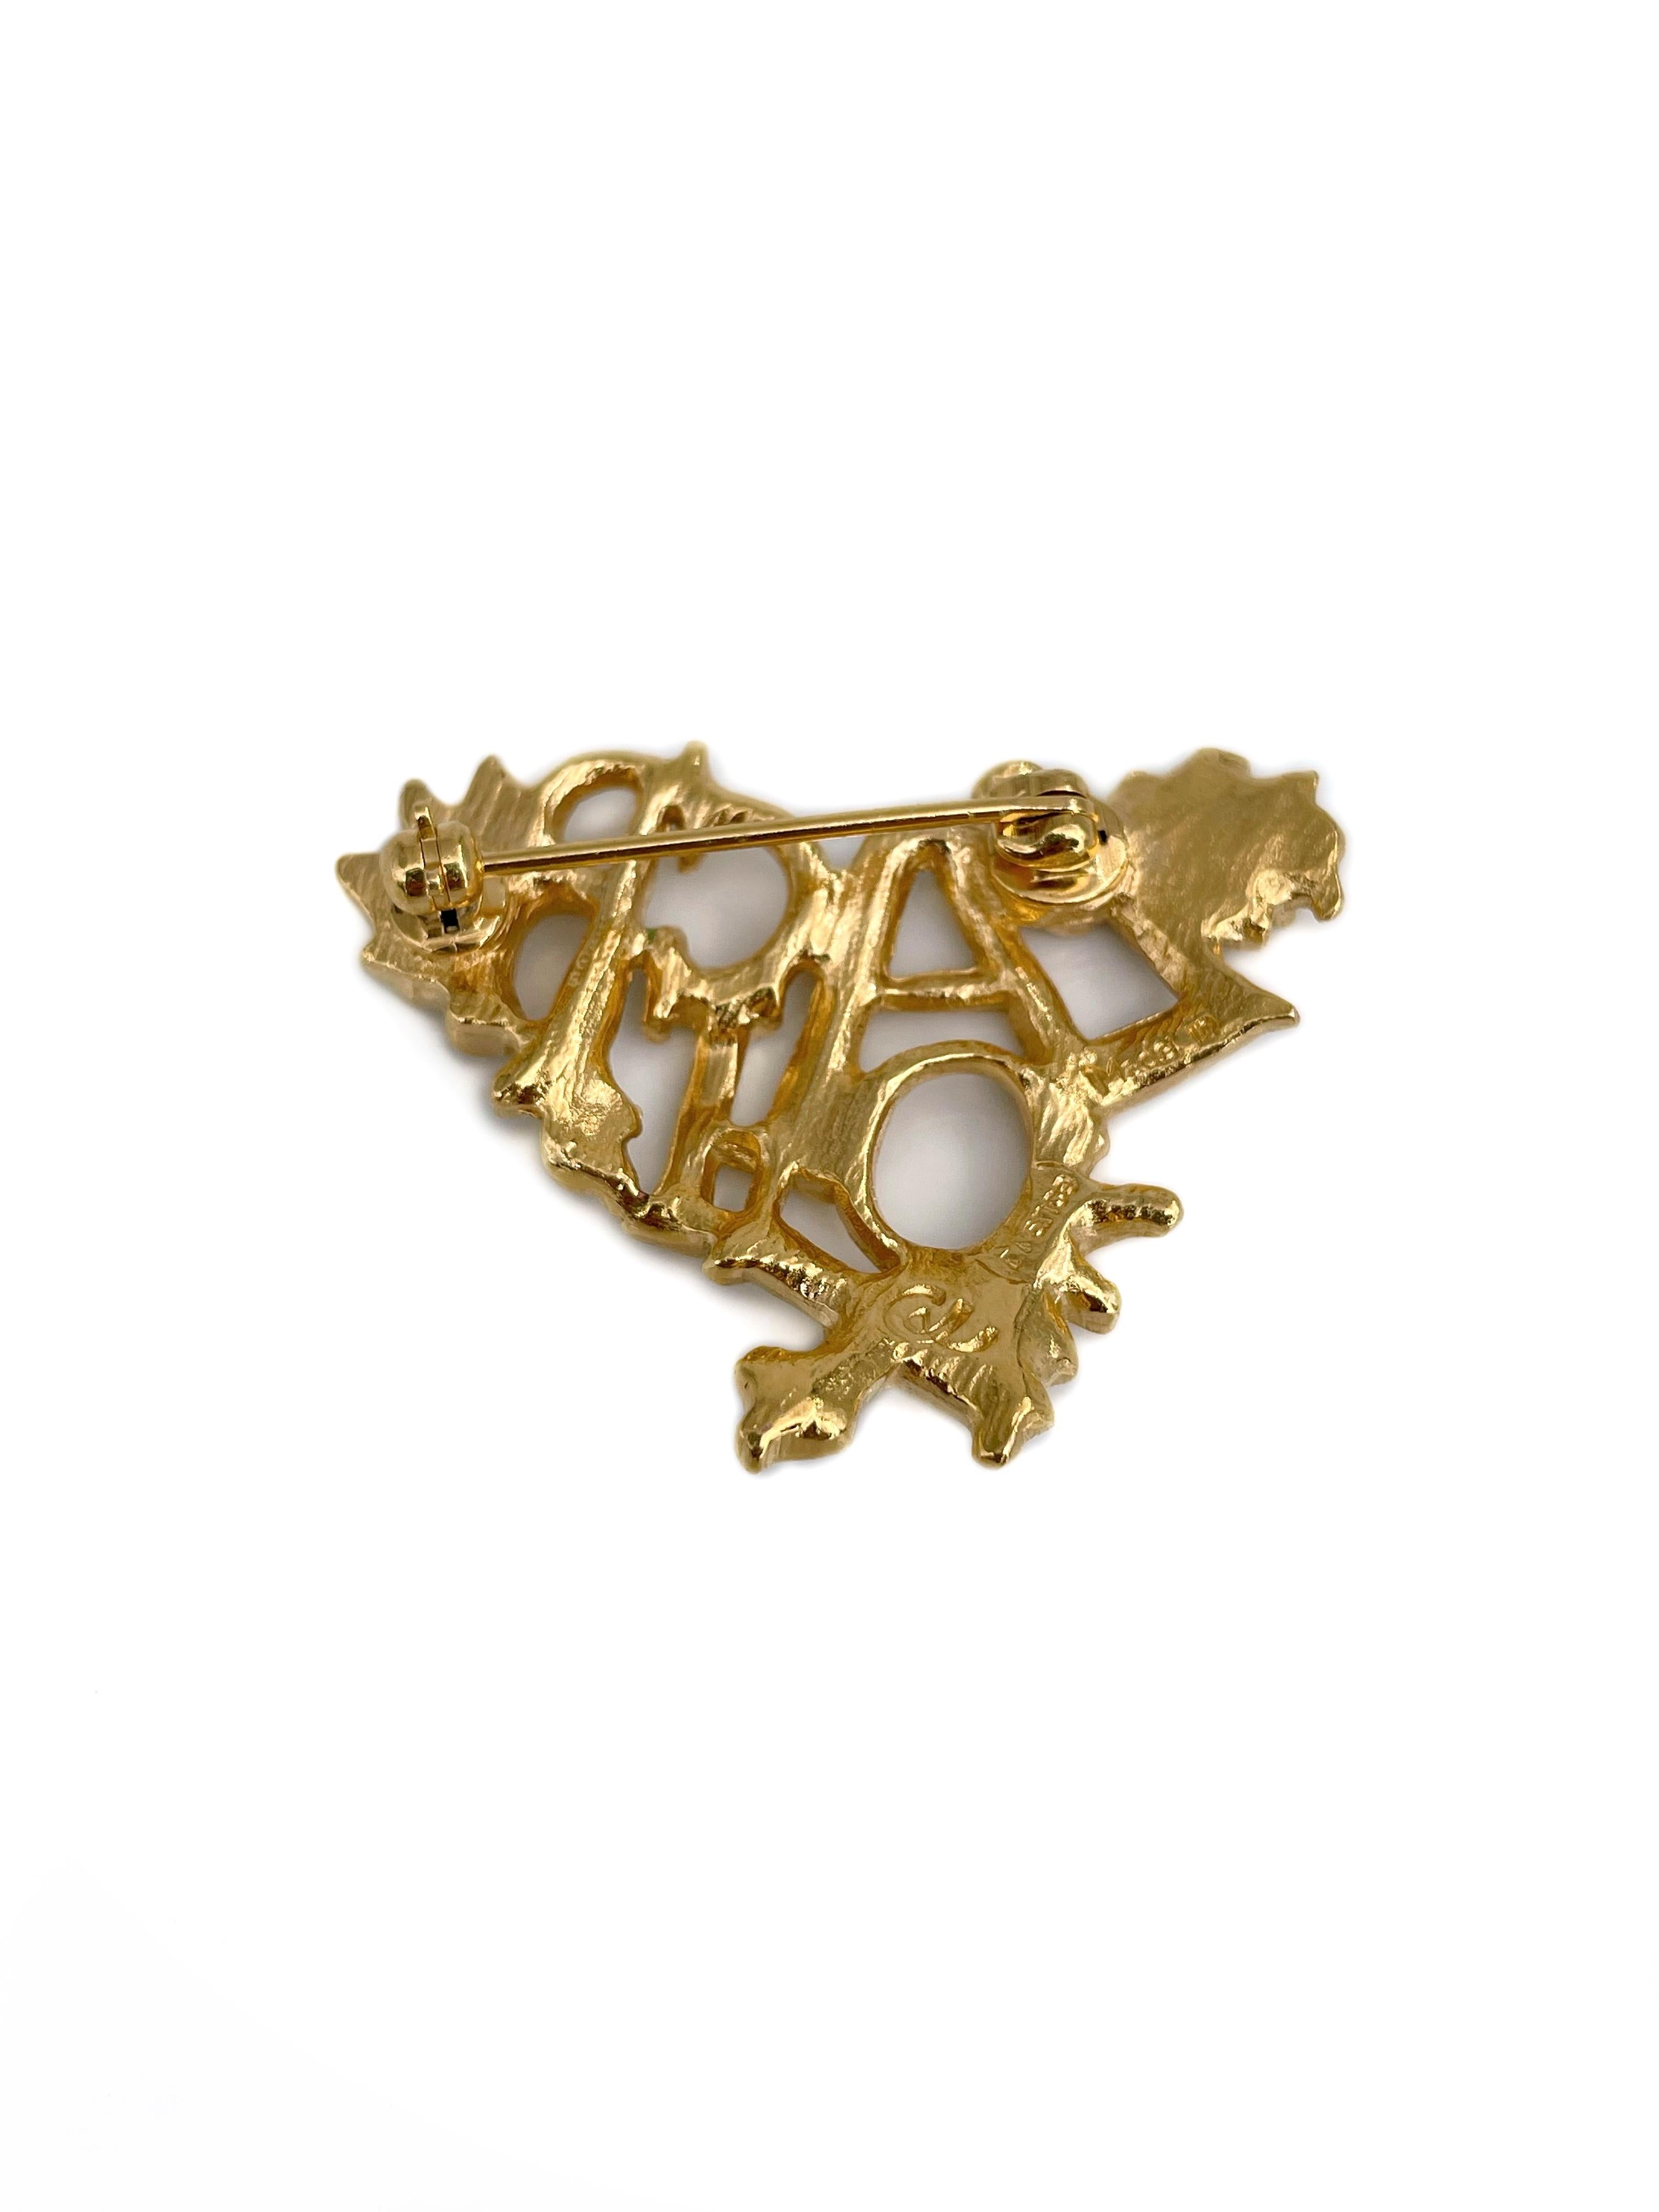 Modern 1990s Vintage Christian Lacroix Gold Tone Openwork Logo Heart Pin Brooch For Sale